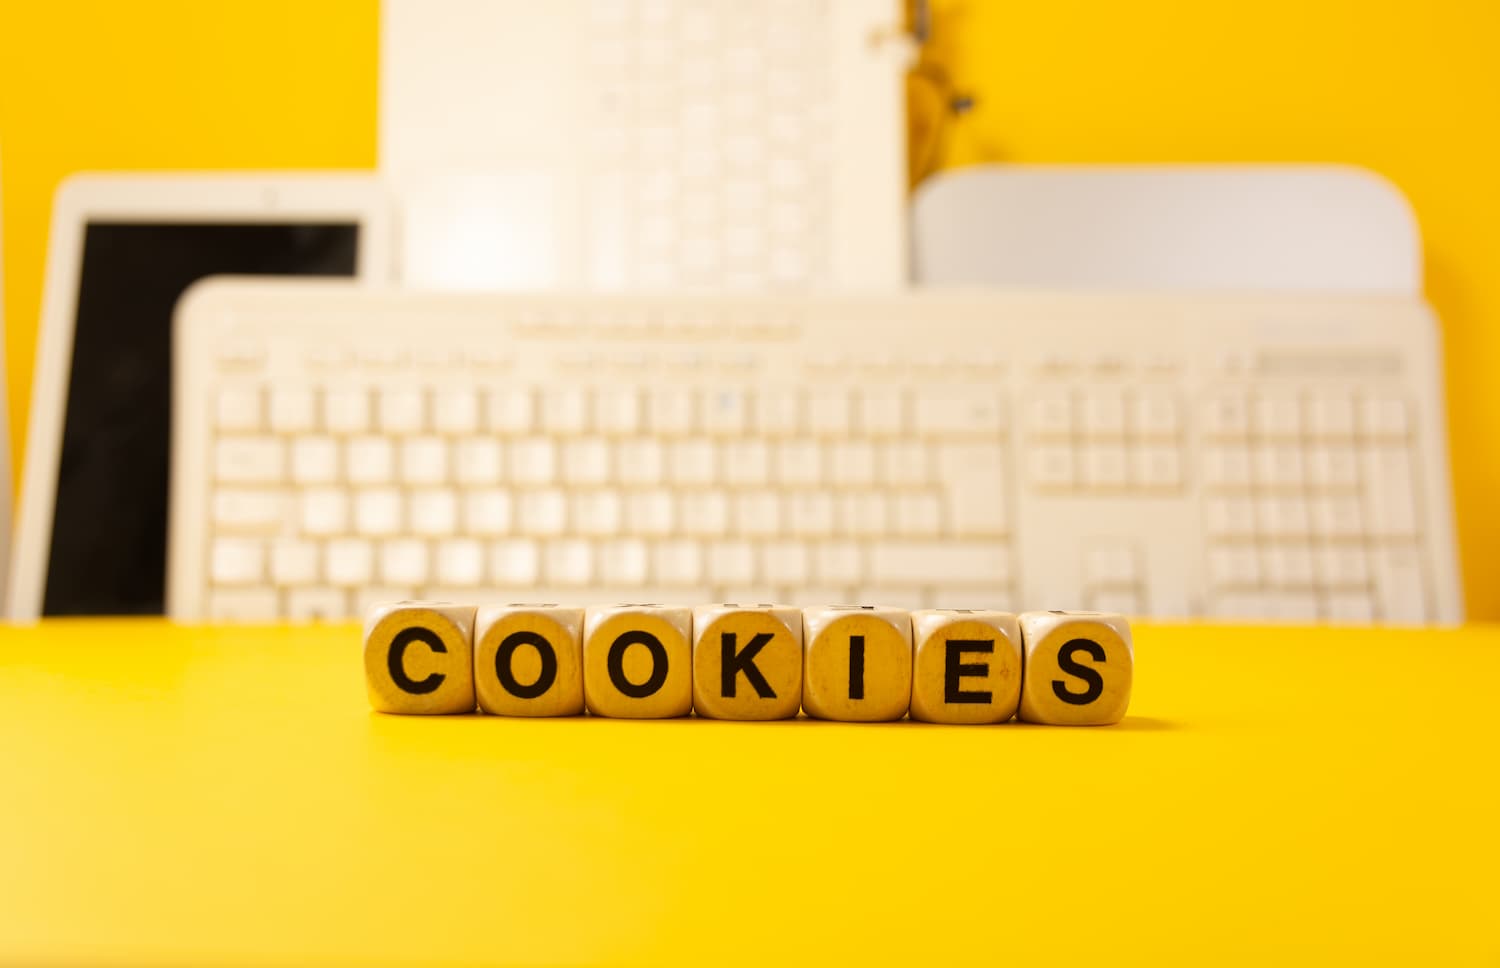 the word cookies spelled out in front of computer components